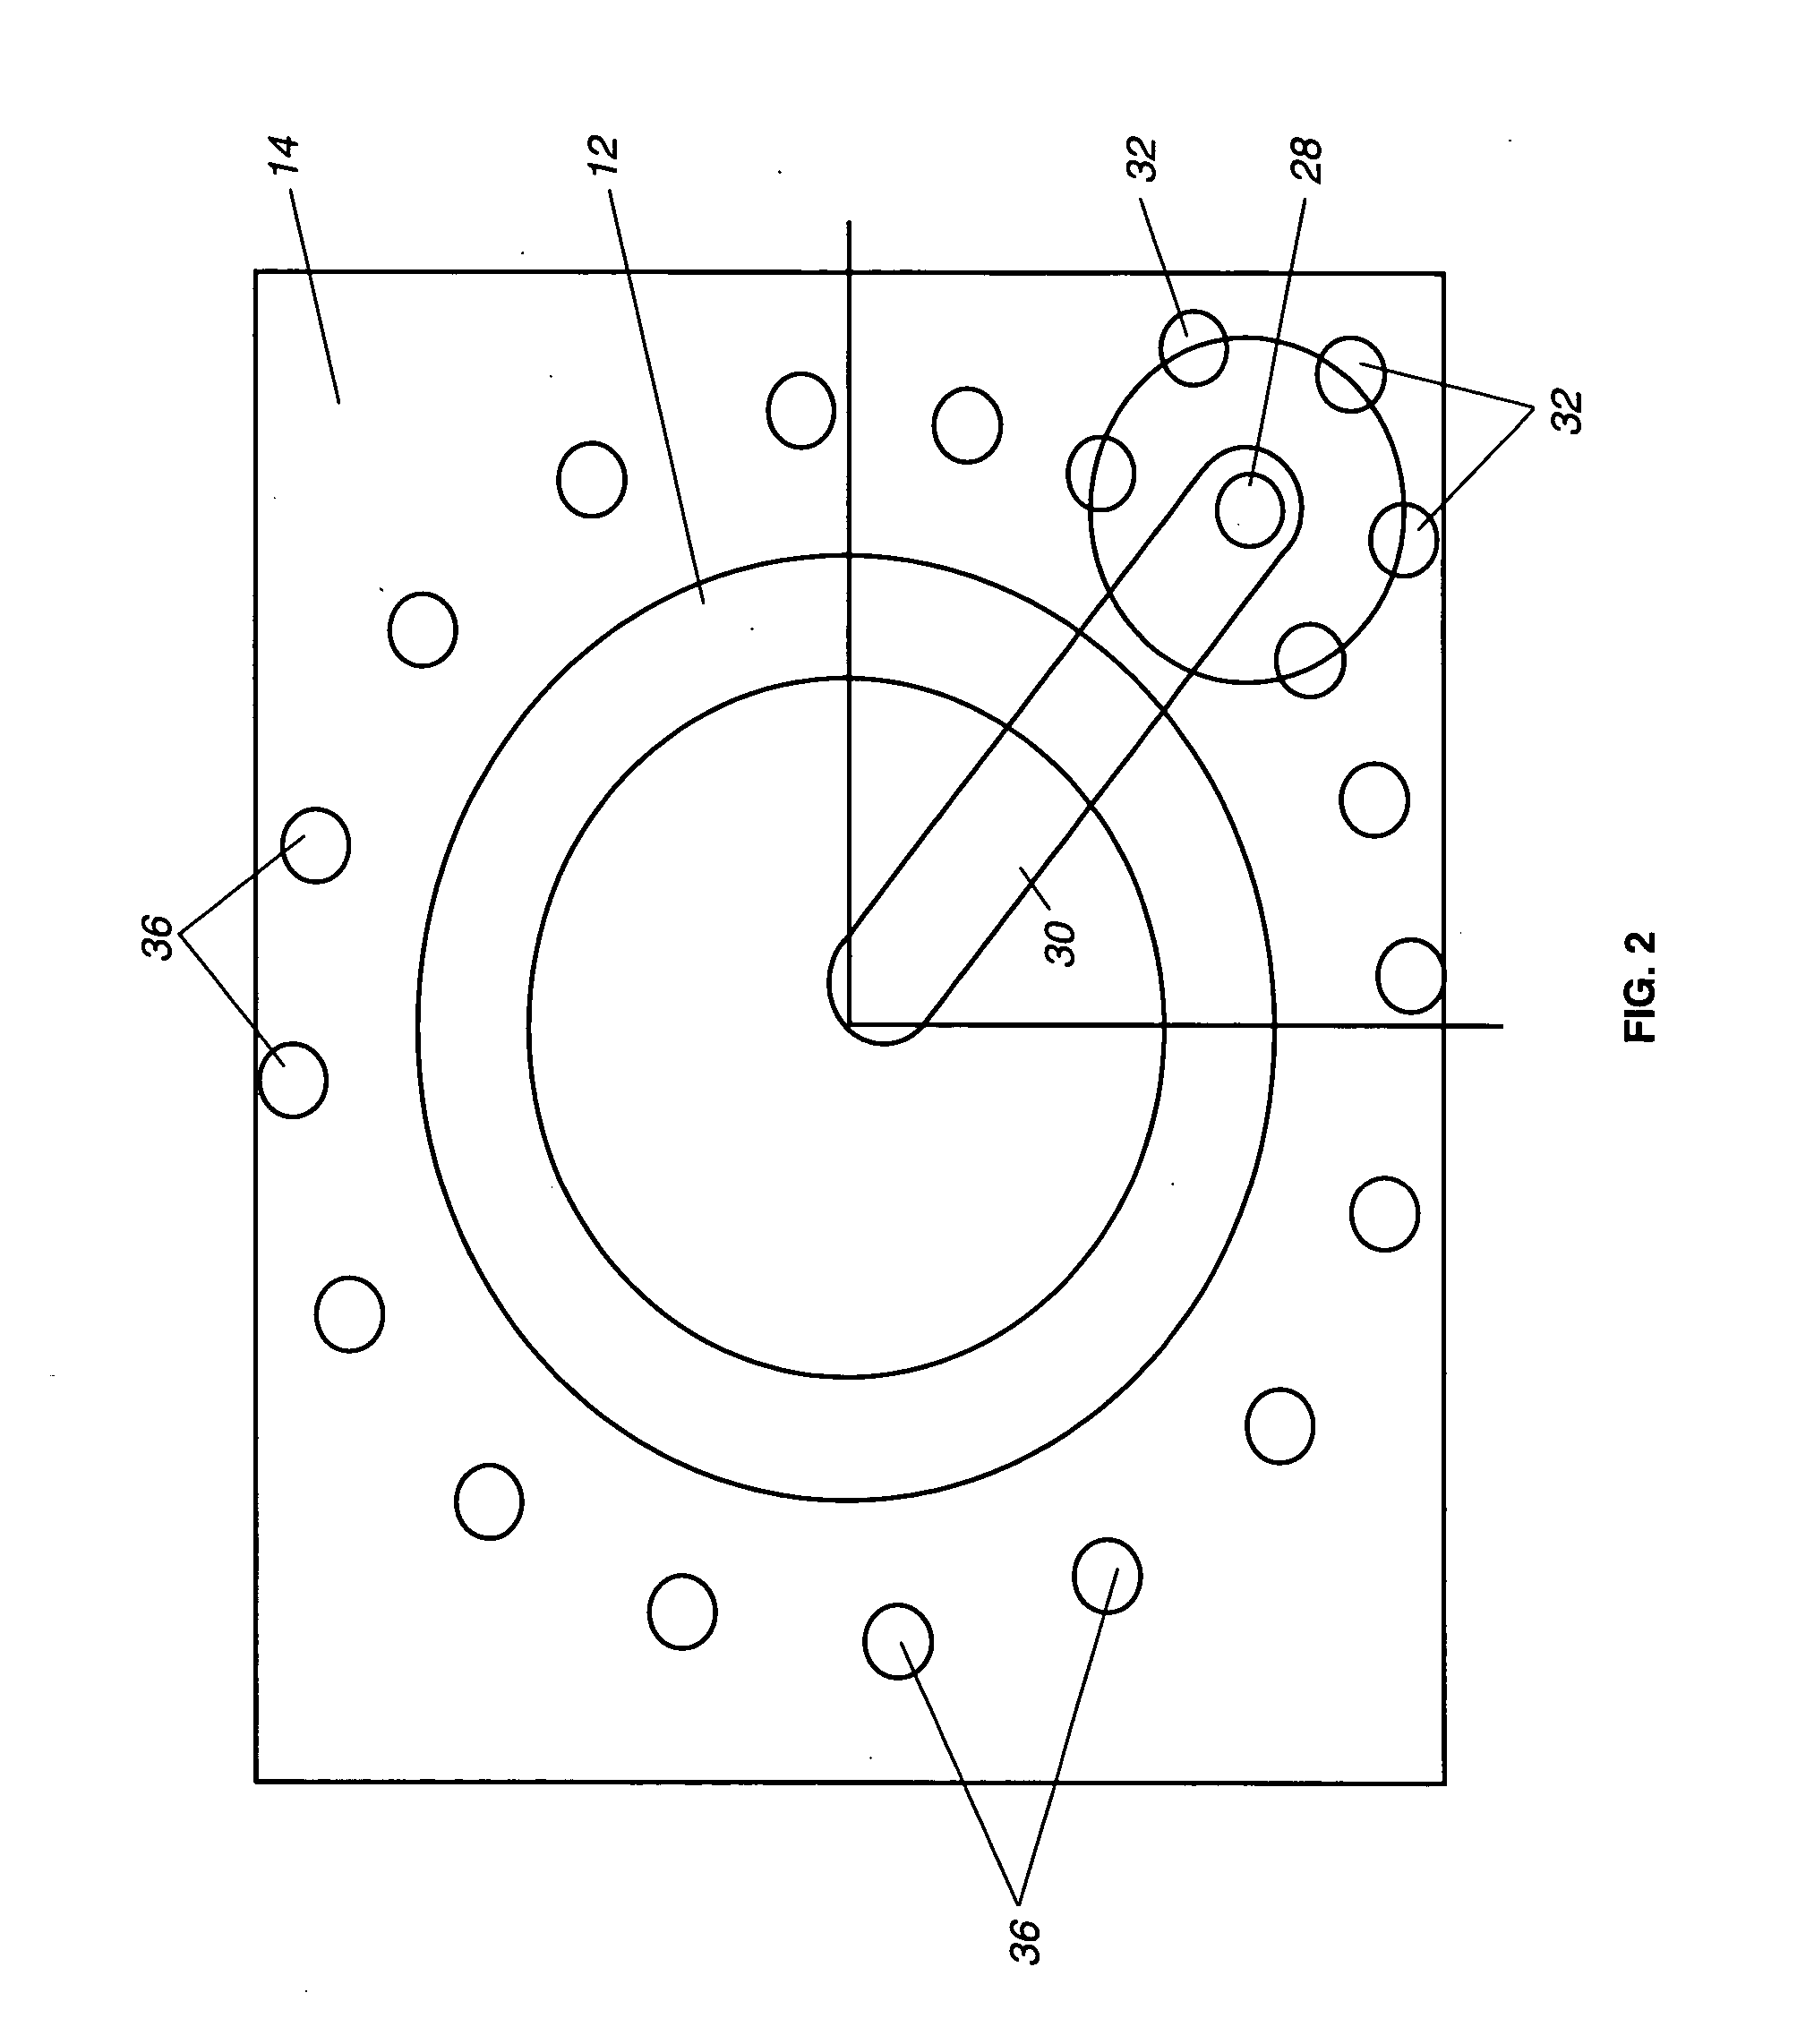 Millimeter wave phased array systems with ring slot radiator element